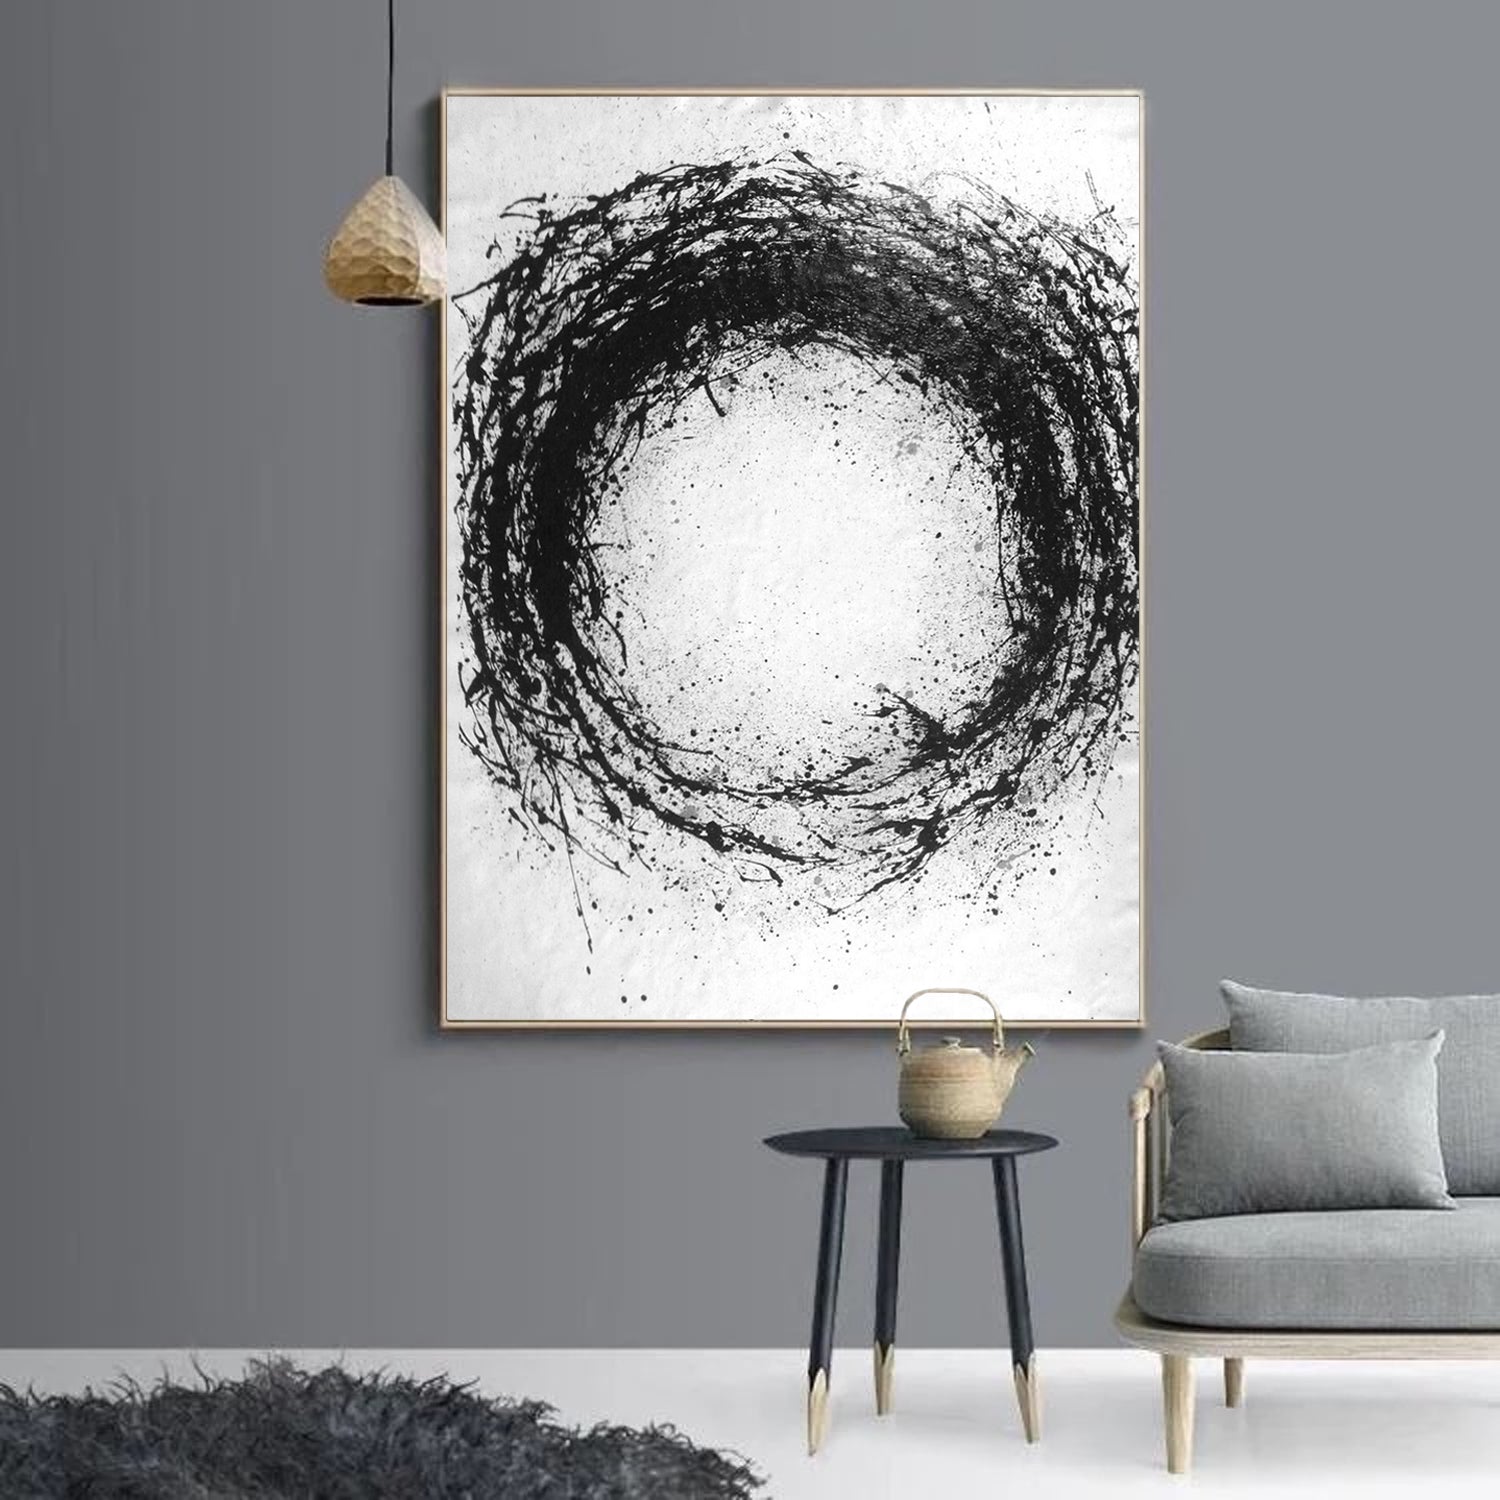 Oversized black and white canvas art, large contemporary art